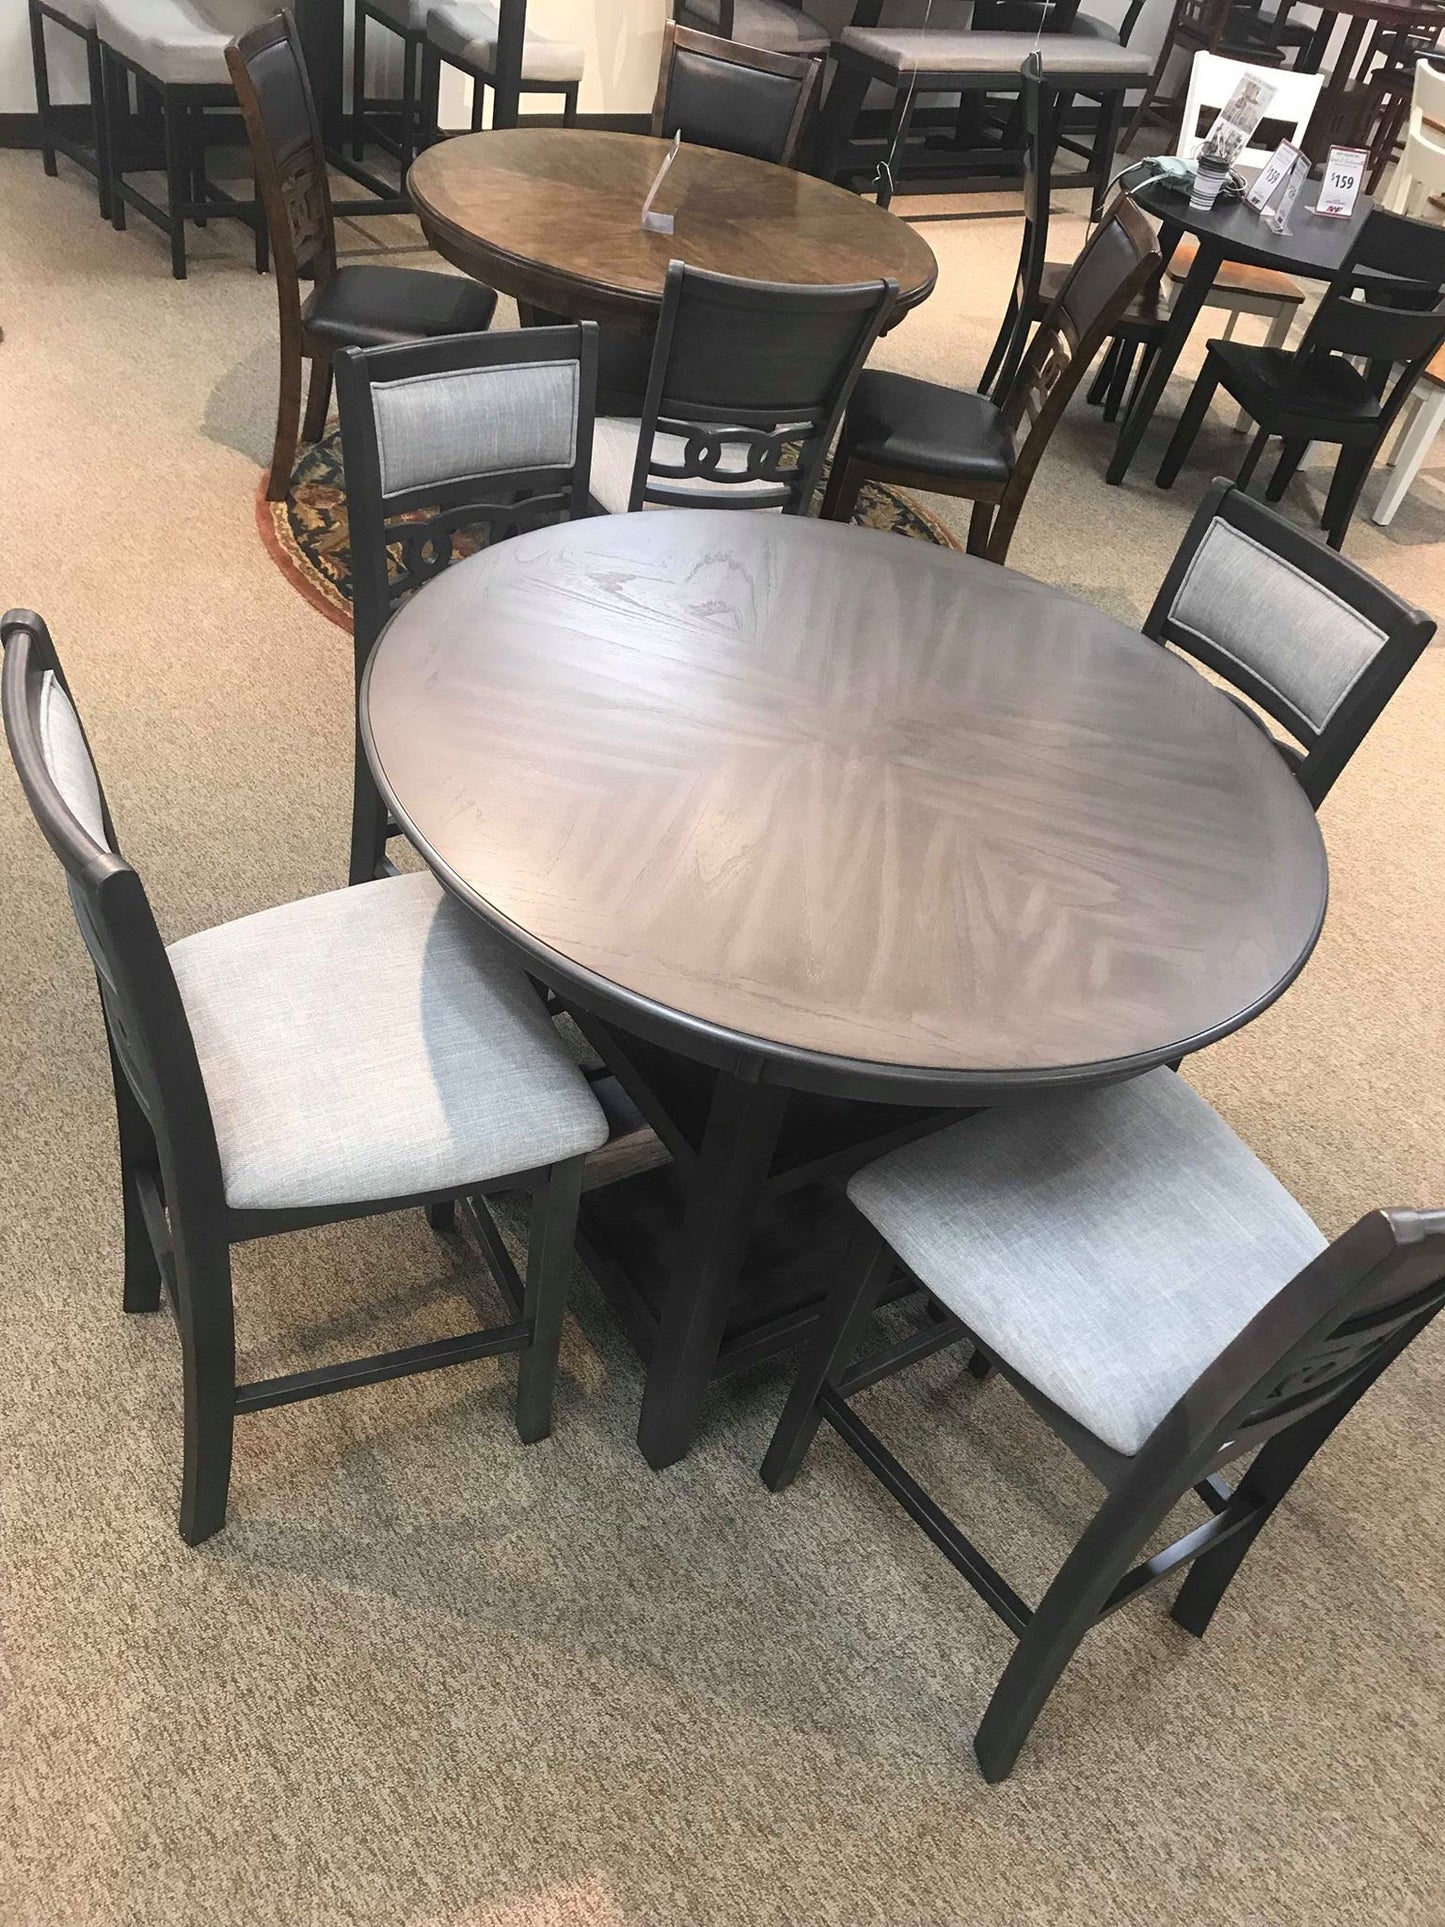 WEEKLY or MONTHLY. Gia Pub Dining Set in Brown